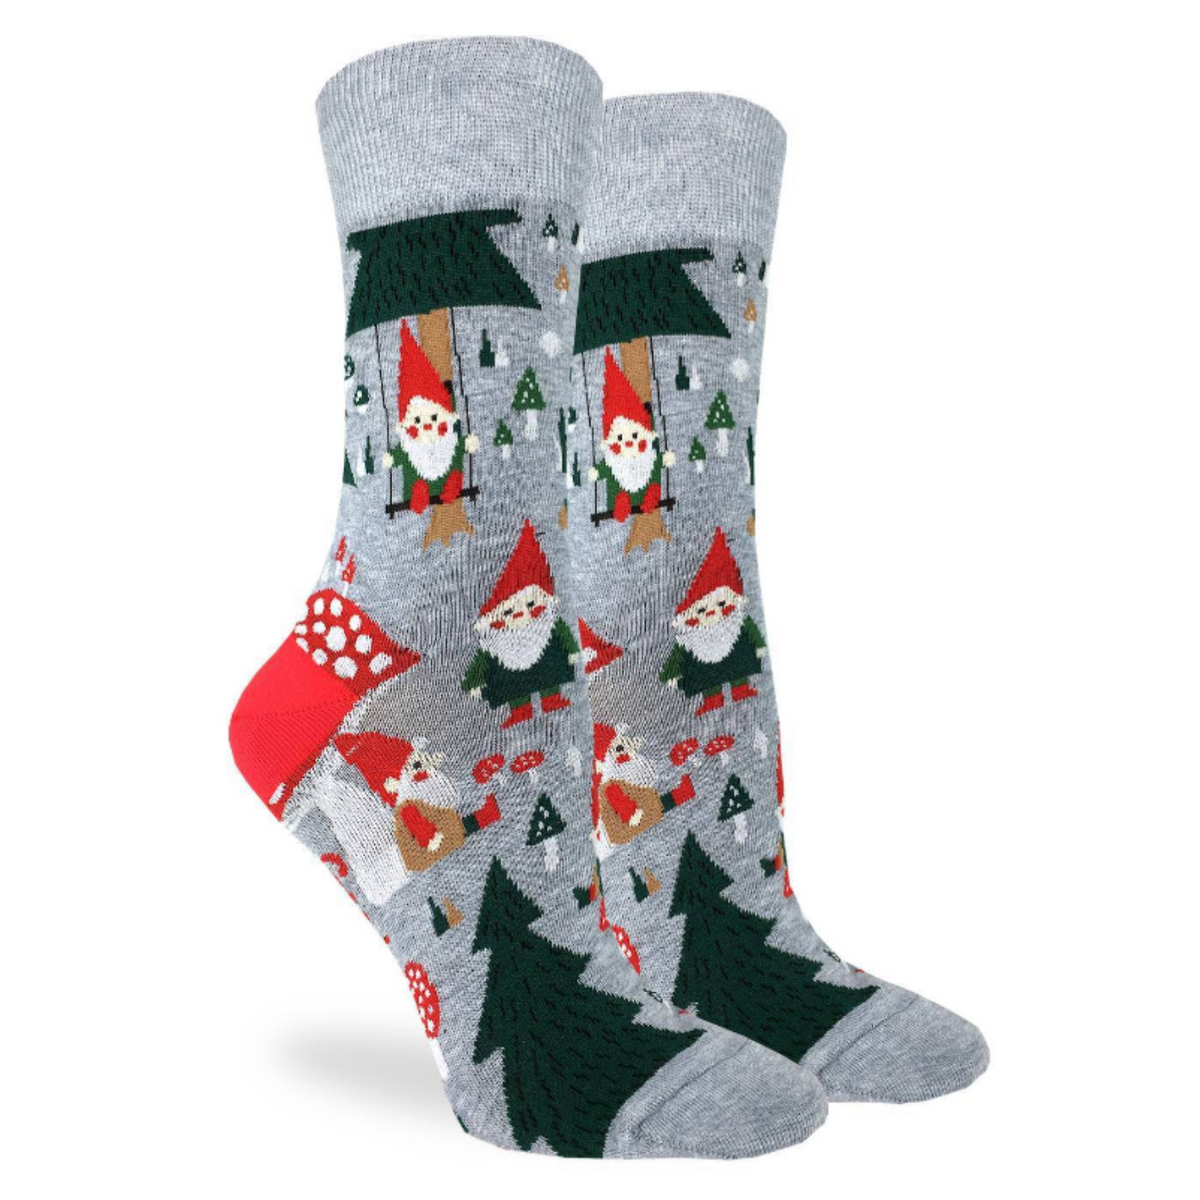 Good Luck Sock Woodland Gnomes women&#39;s and men&#39;s crew socks featuring gray sock with gnomes in red hats, mushrooms, and trees all over. Socks shown on display feet.  